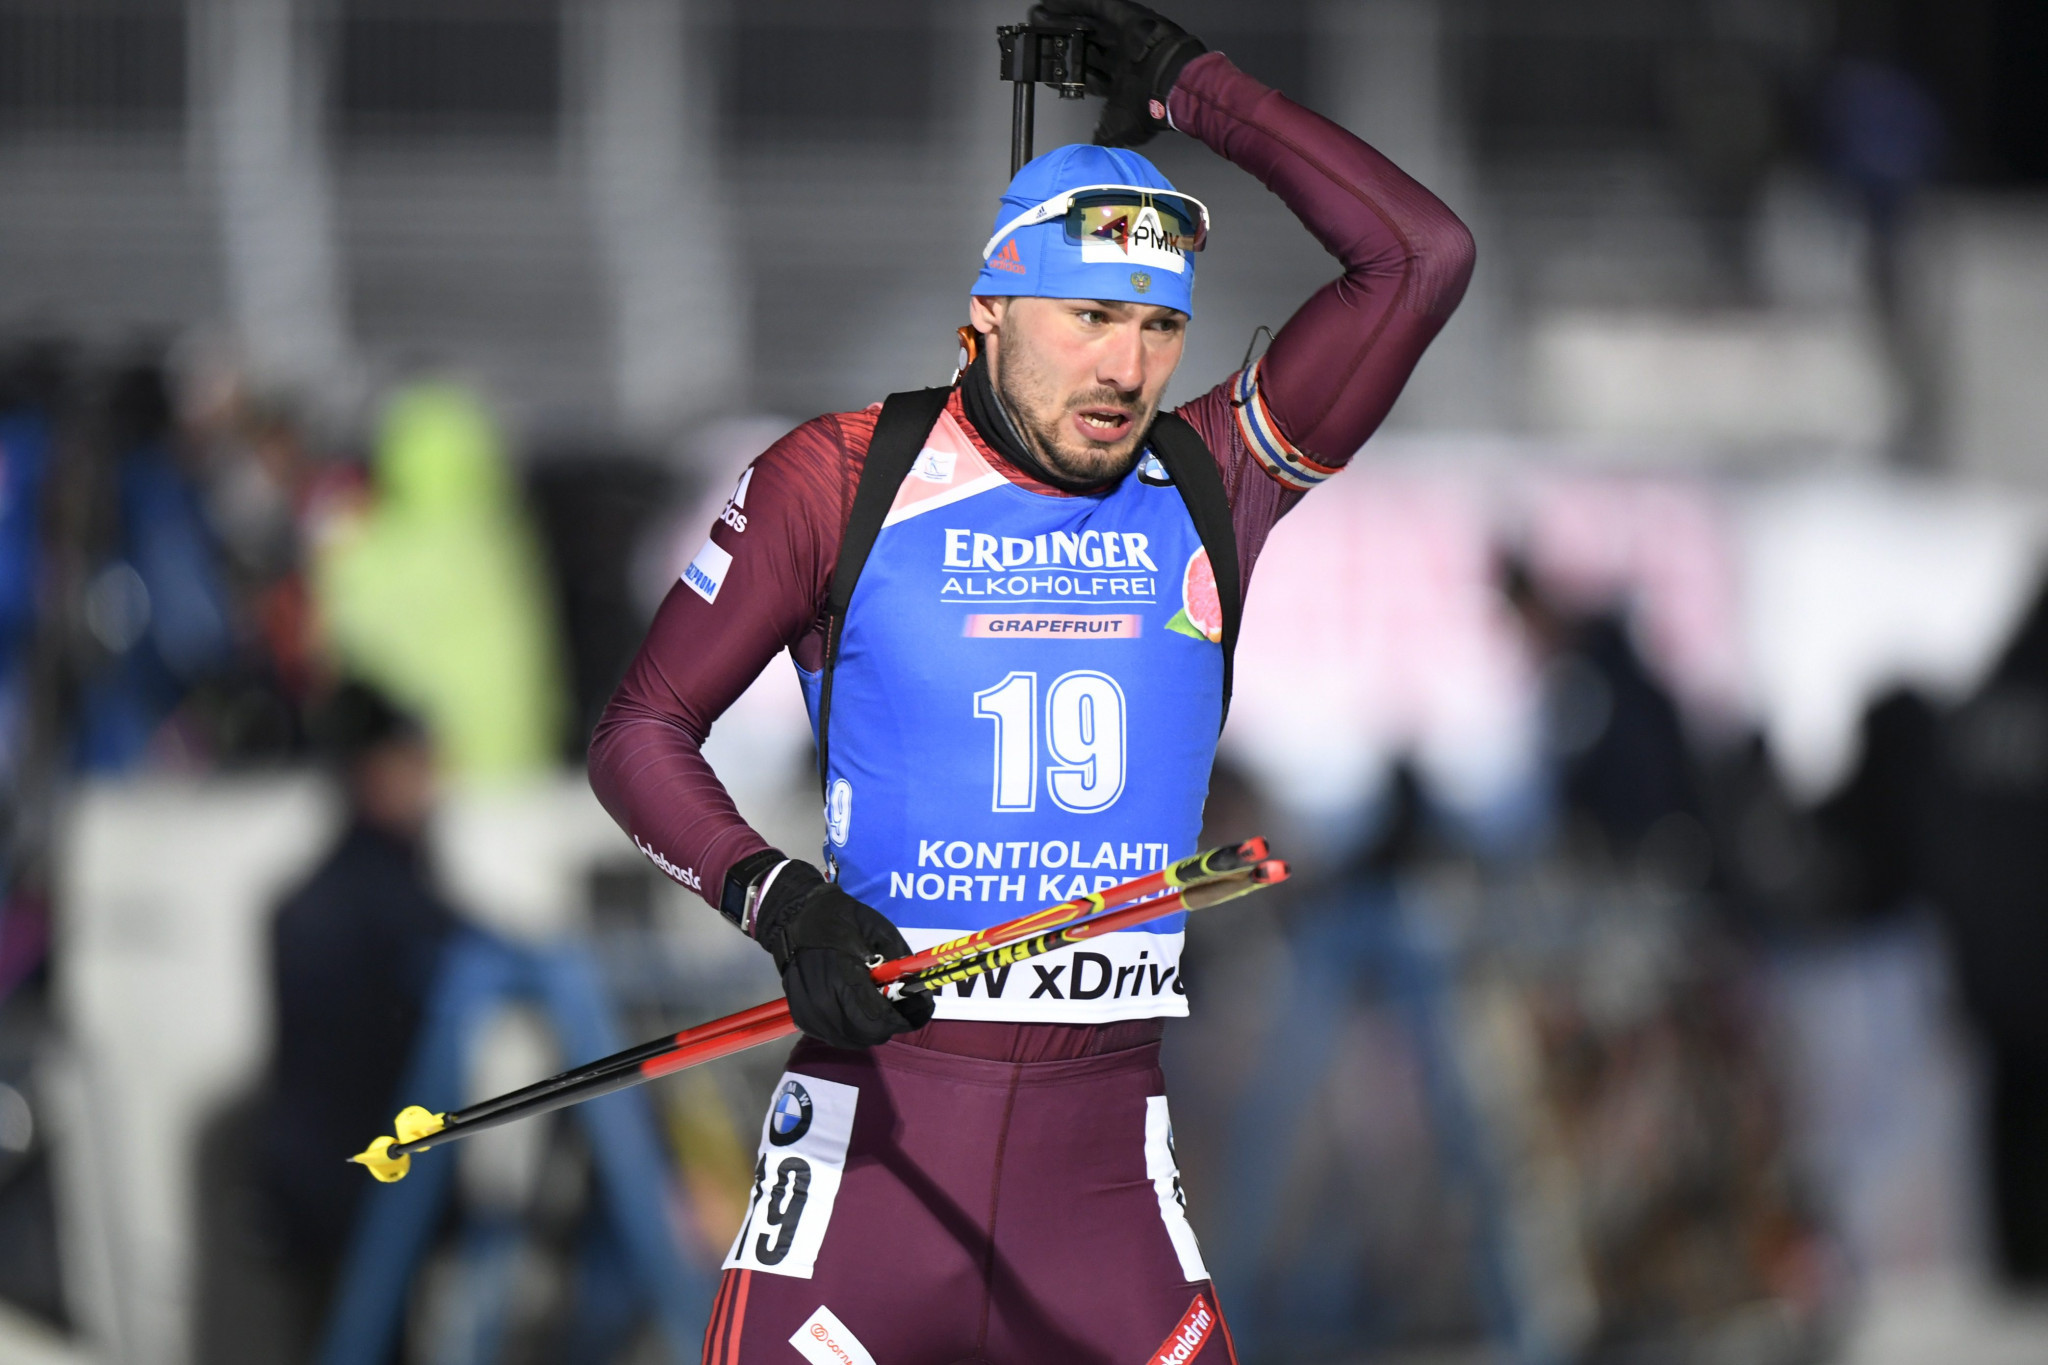 Five Russian biathletes including Anton Shipulin are under investigation for anti-doping violations at last year's World Championships ©Getty Images